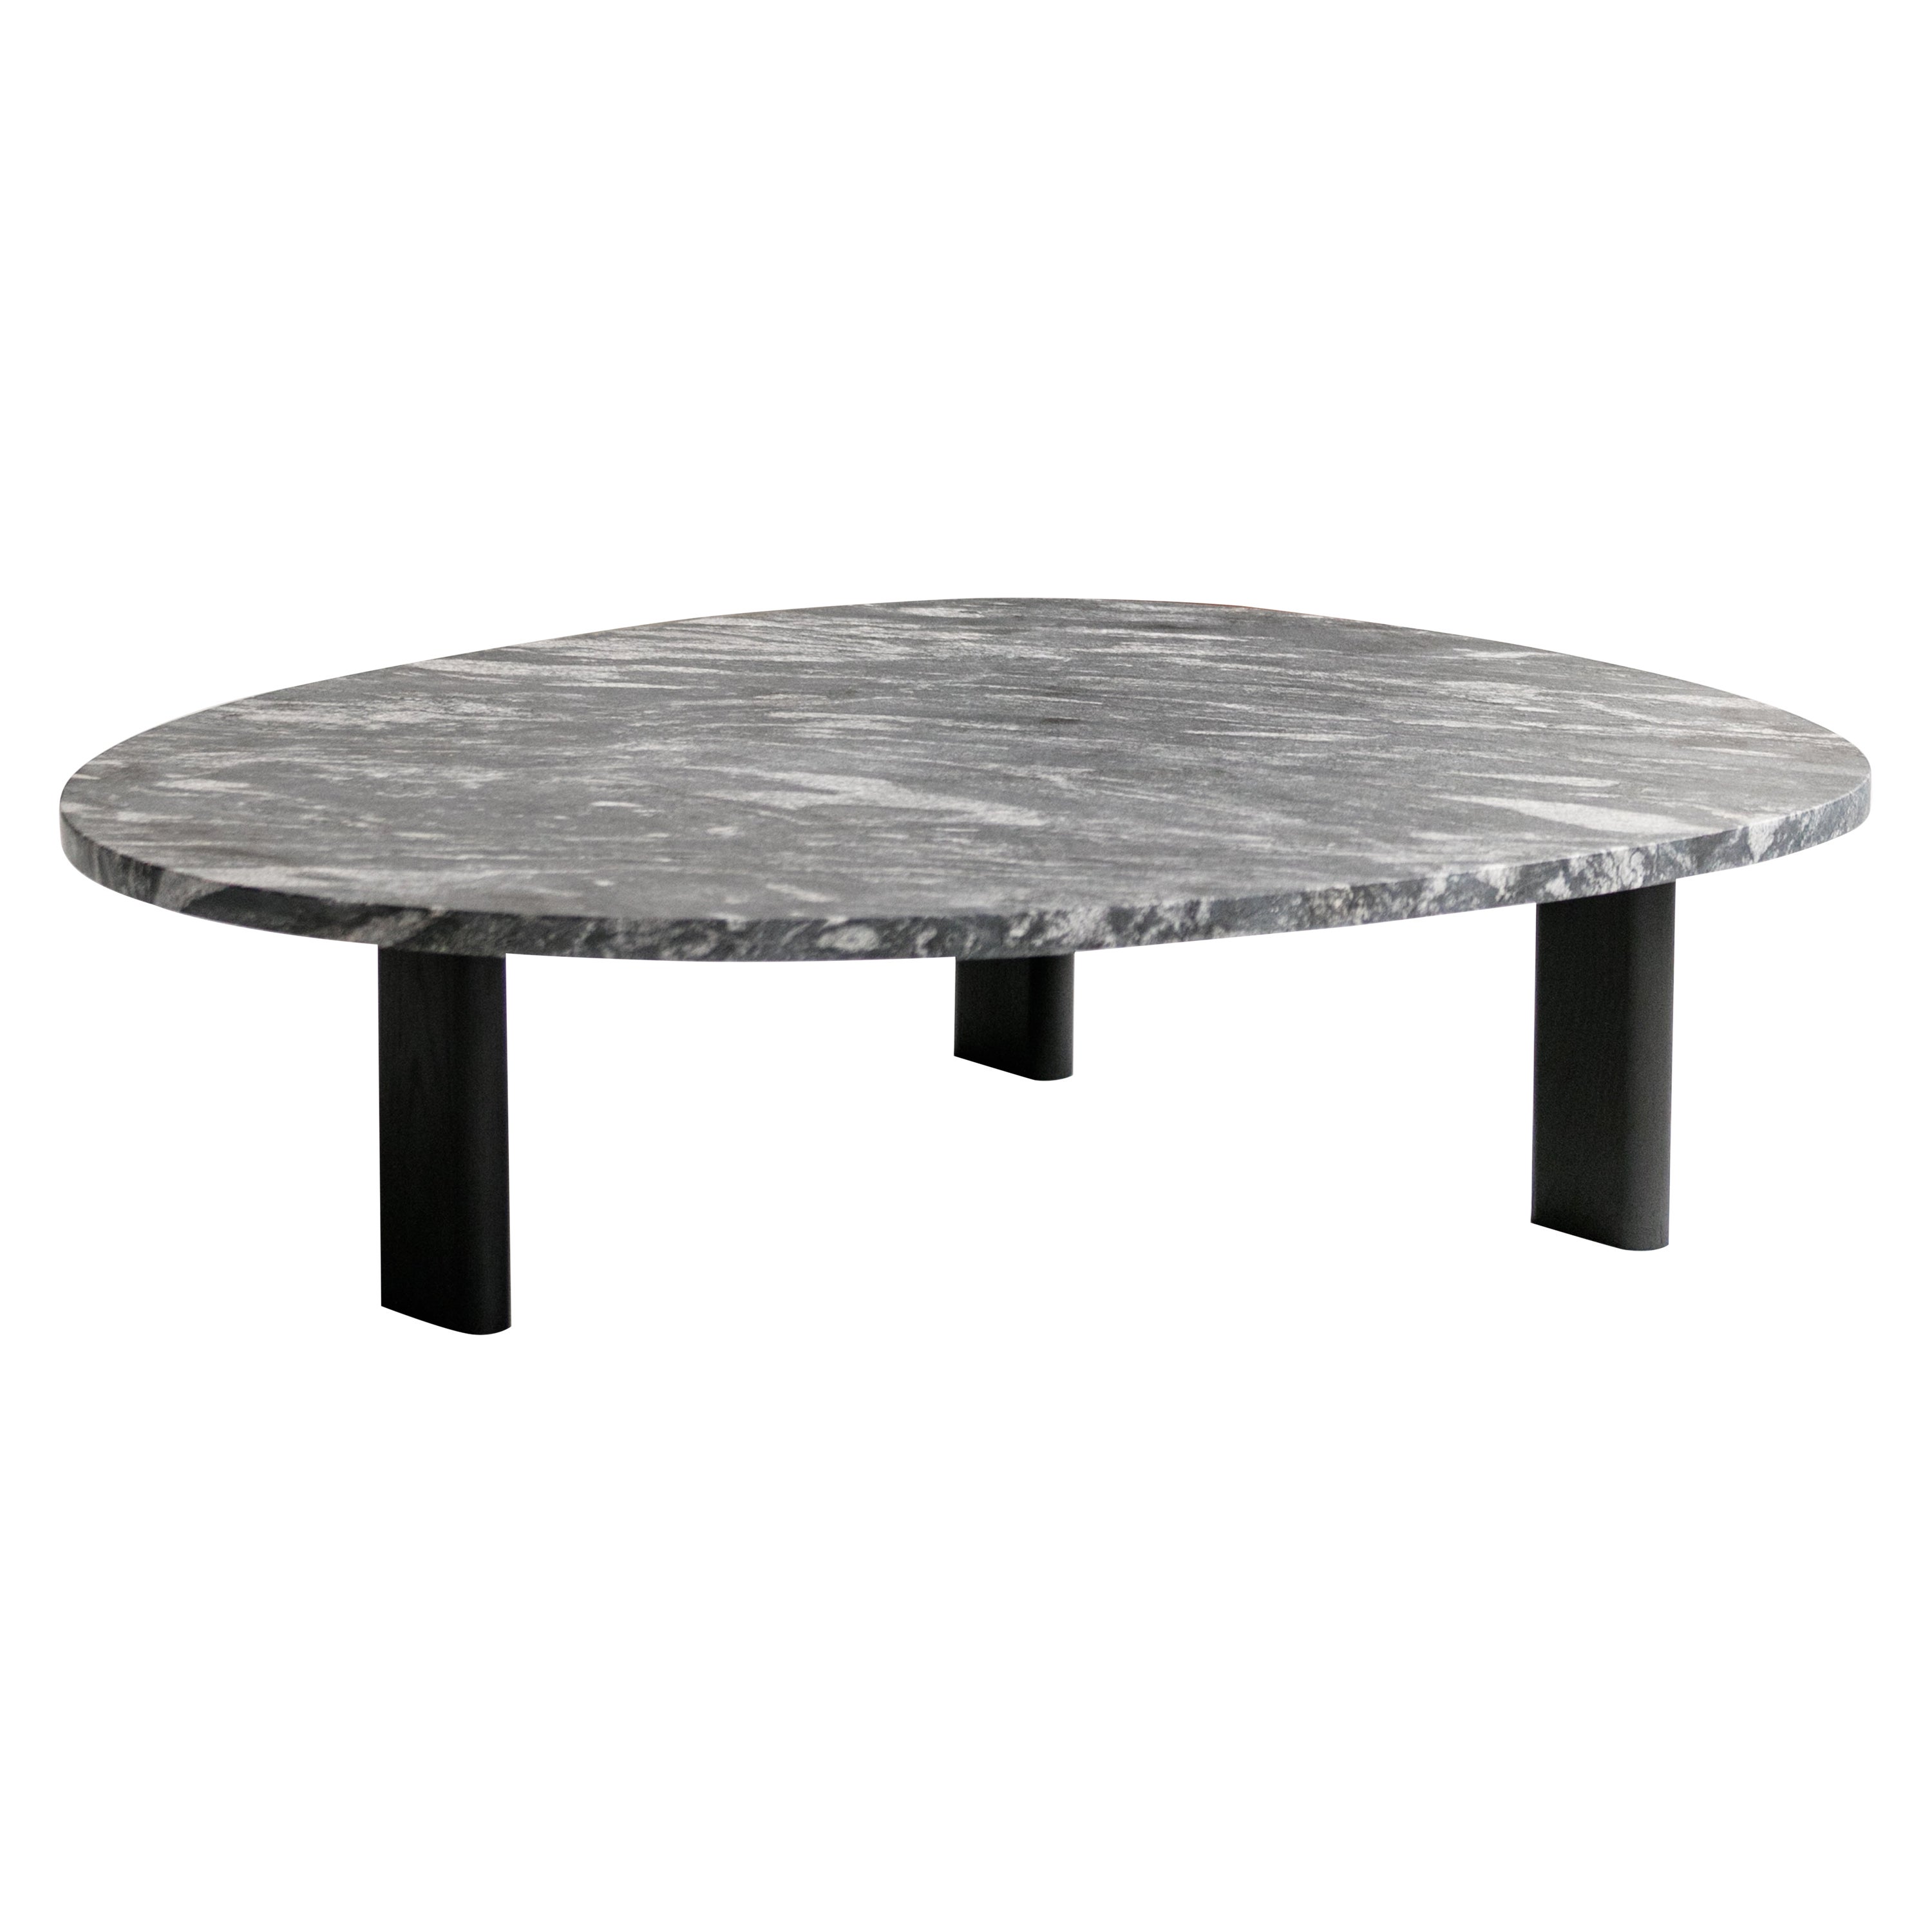 Vesta Stone Topped & Solid Ash Coffee Table 52"L by Mary Ratcliffe Studio For Sale